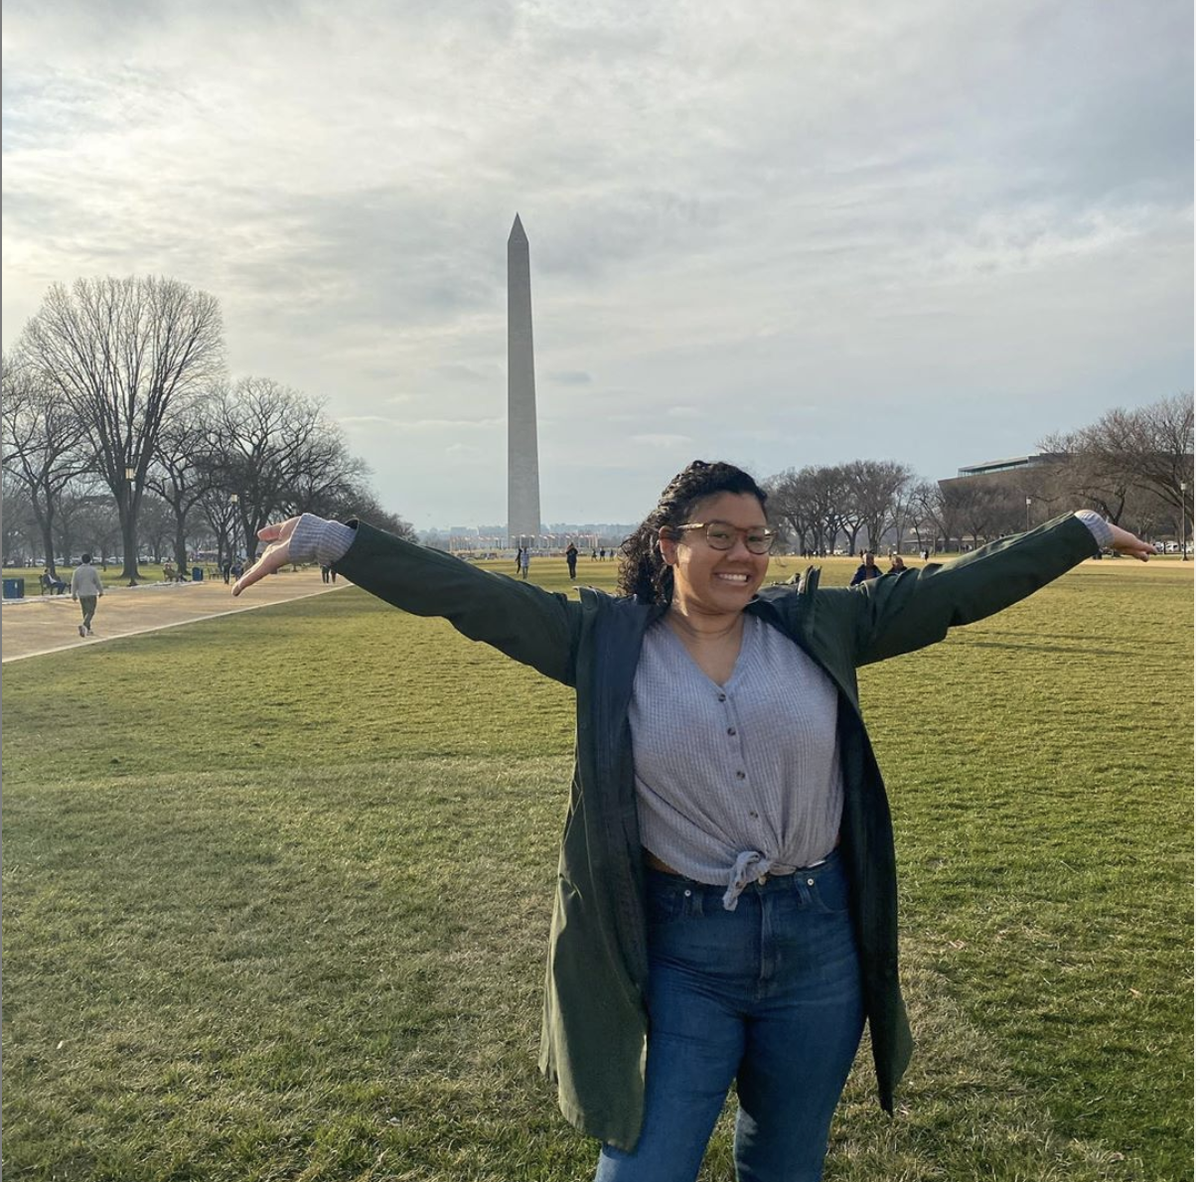 . @jadenamos is the managing editor of digital. She is a senior. She has been a beat reporter, news editor, general assignments editor and social media editor. (She also wrote this thread!)